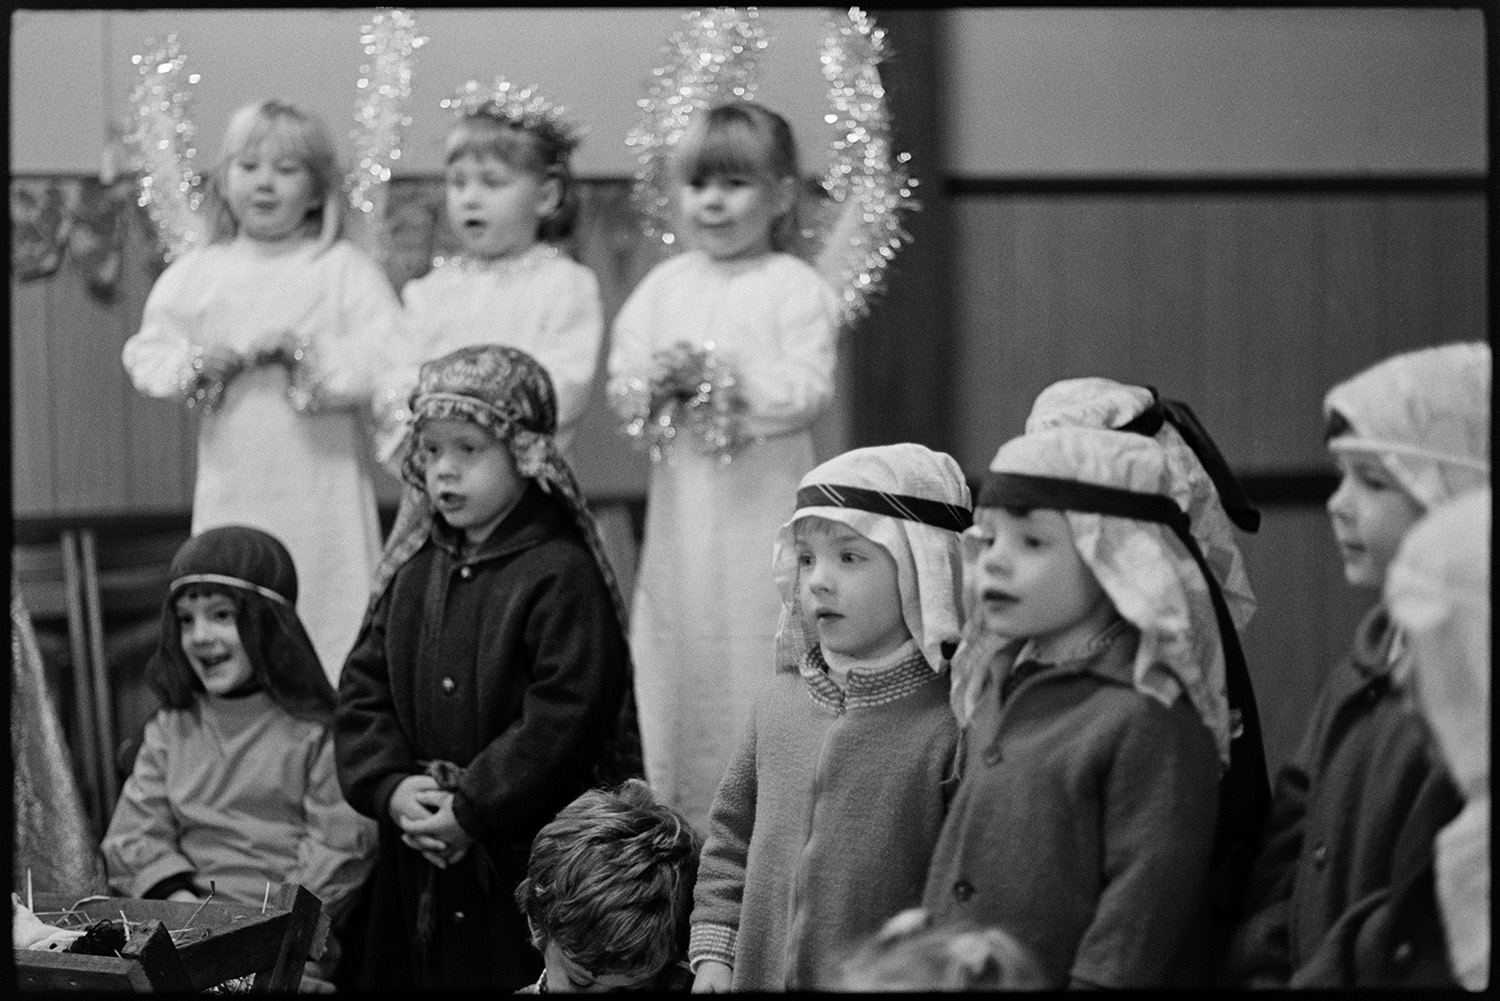 Christmas, children's Nativity play, singing carols.
[Children in costume performing a Christmas Nativity play in Dolton village hall. They are singing a carol.]